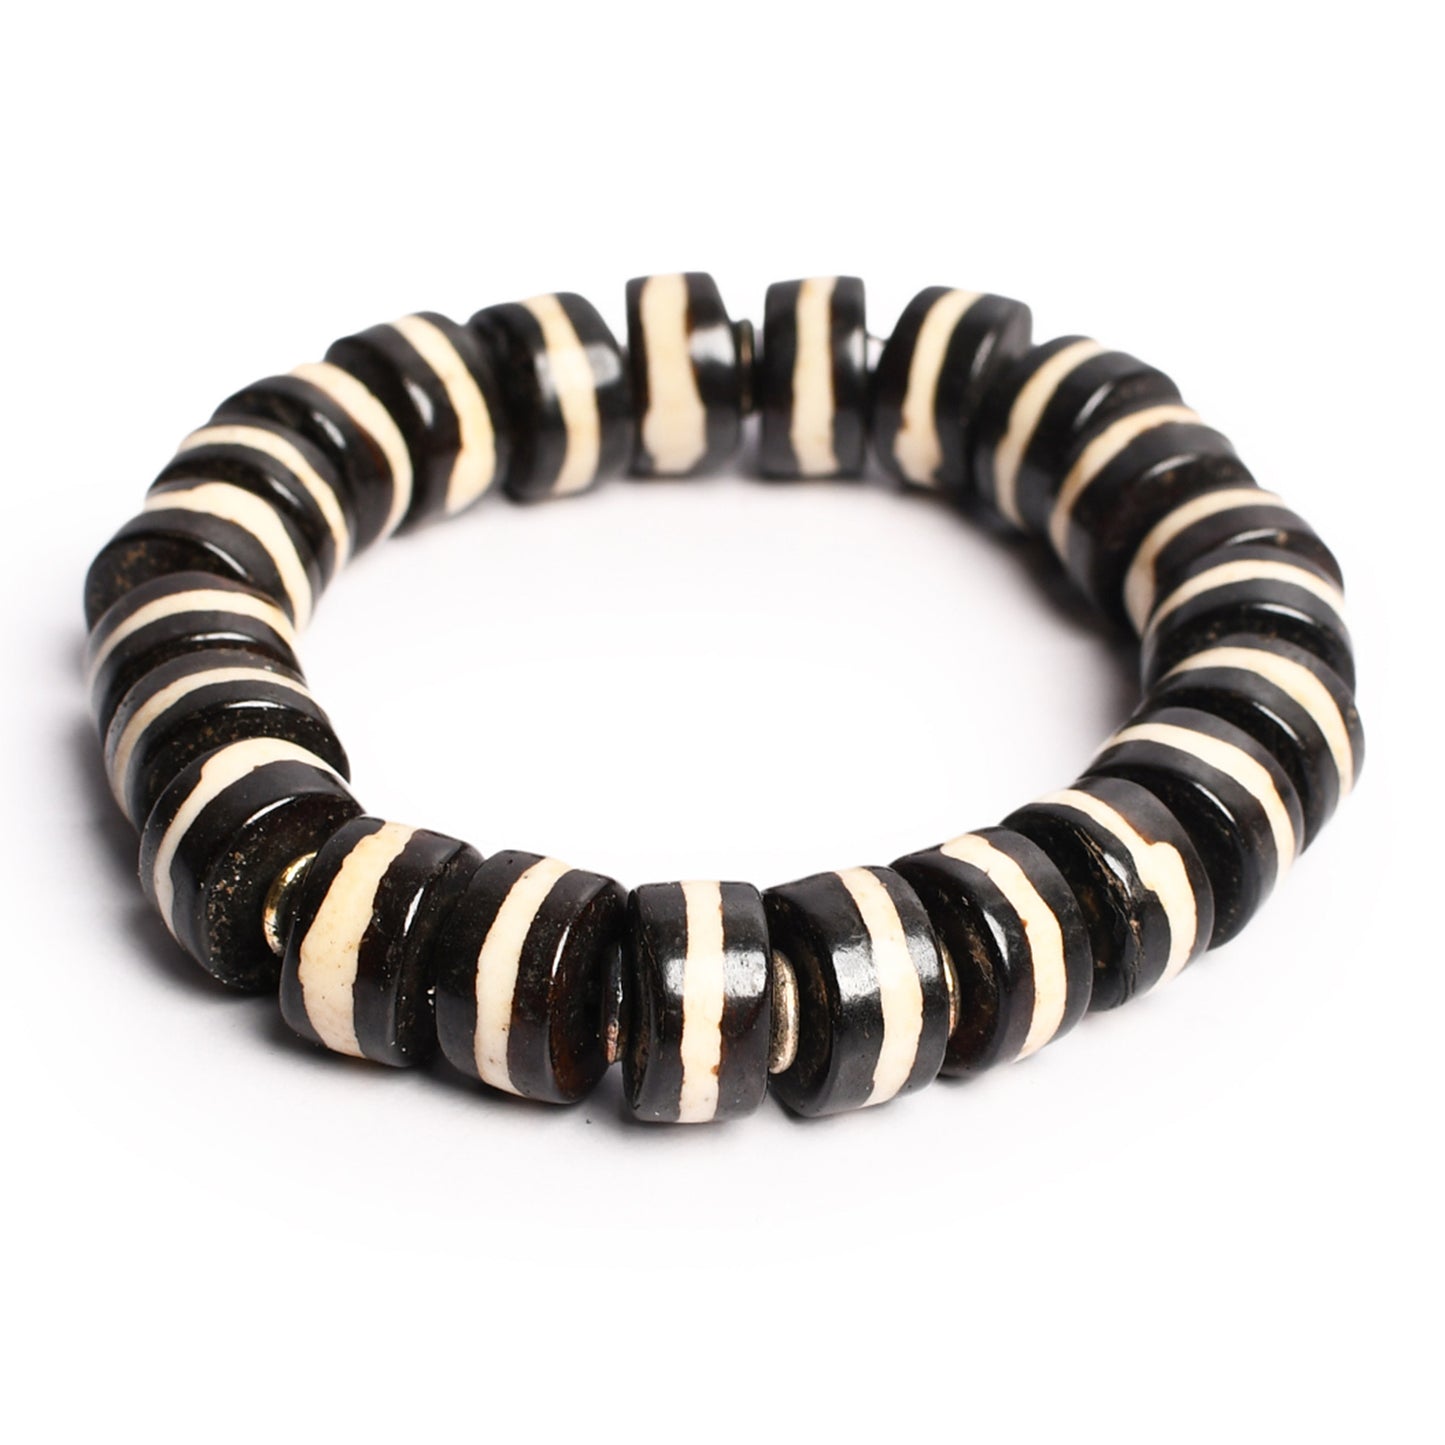 Black & White Beaded Stretchable Bracelet by Bamboo Tree Jewels